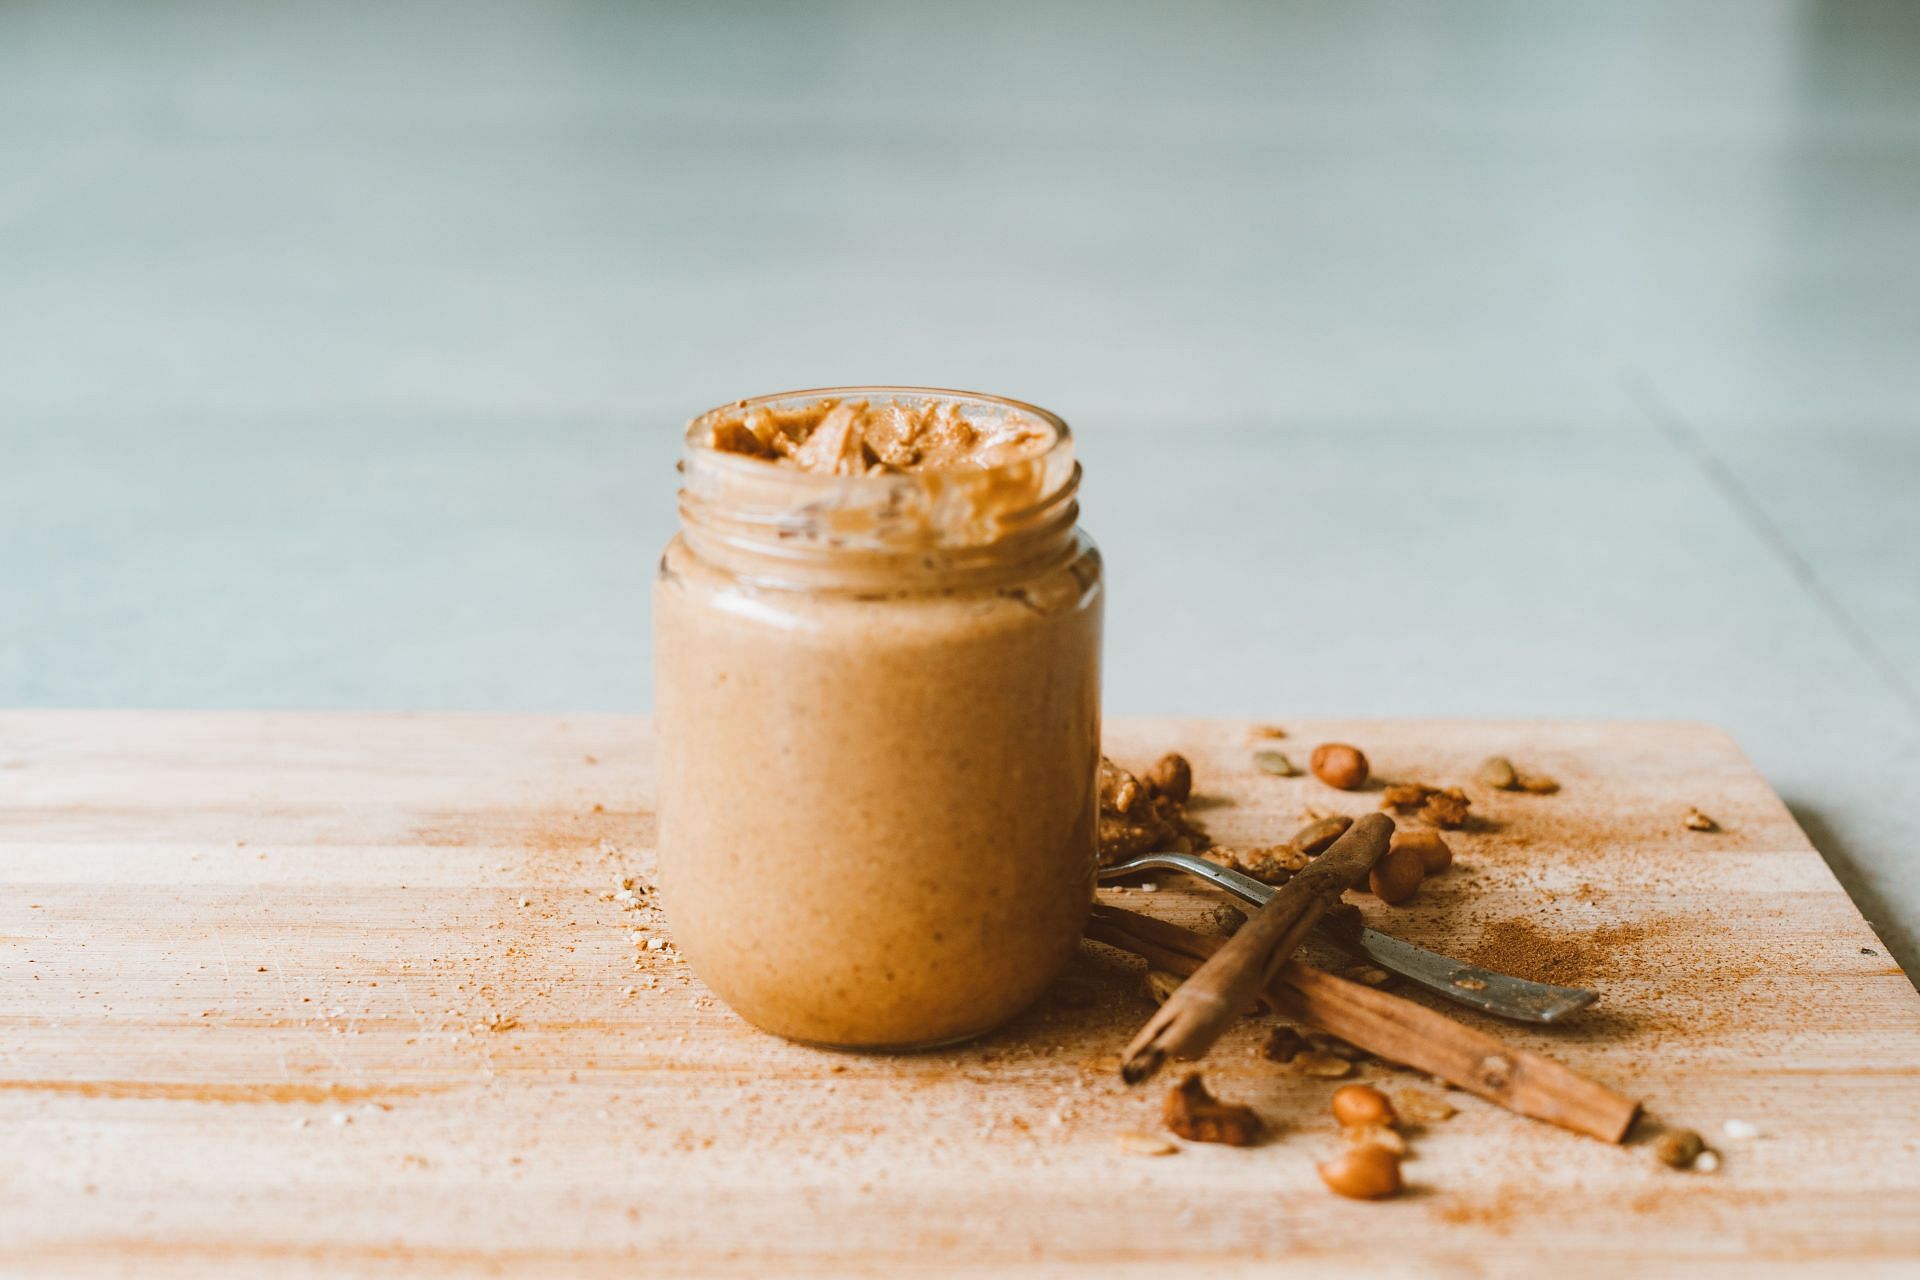 There are several health benefits of Peanut butter. (Image via Pexels/ Roman Odintsov)